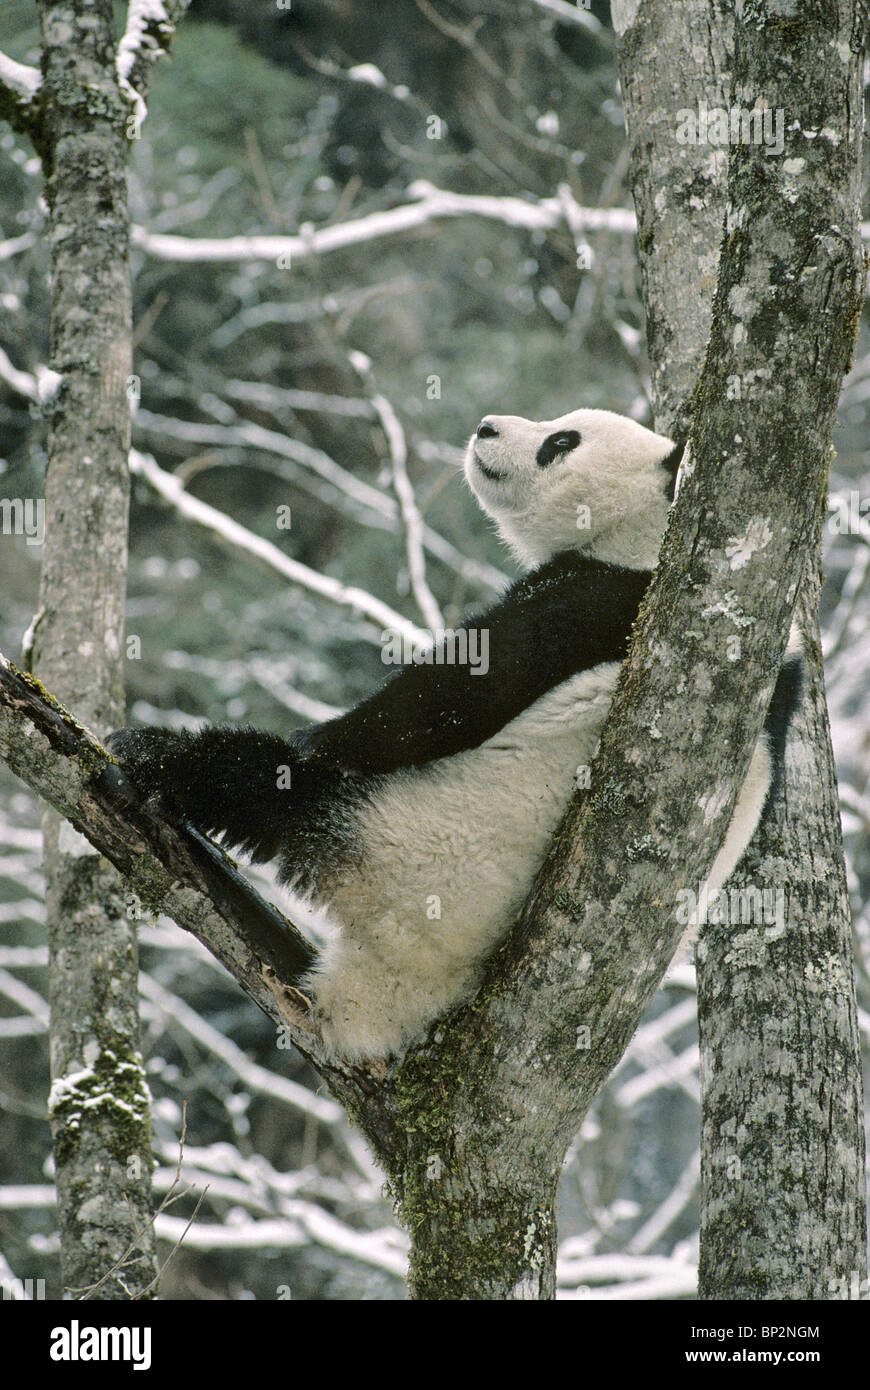 Young giant panda, rests in fork of tree Wolong, China, February Stock Photo